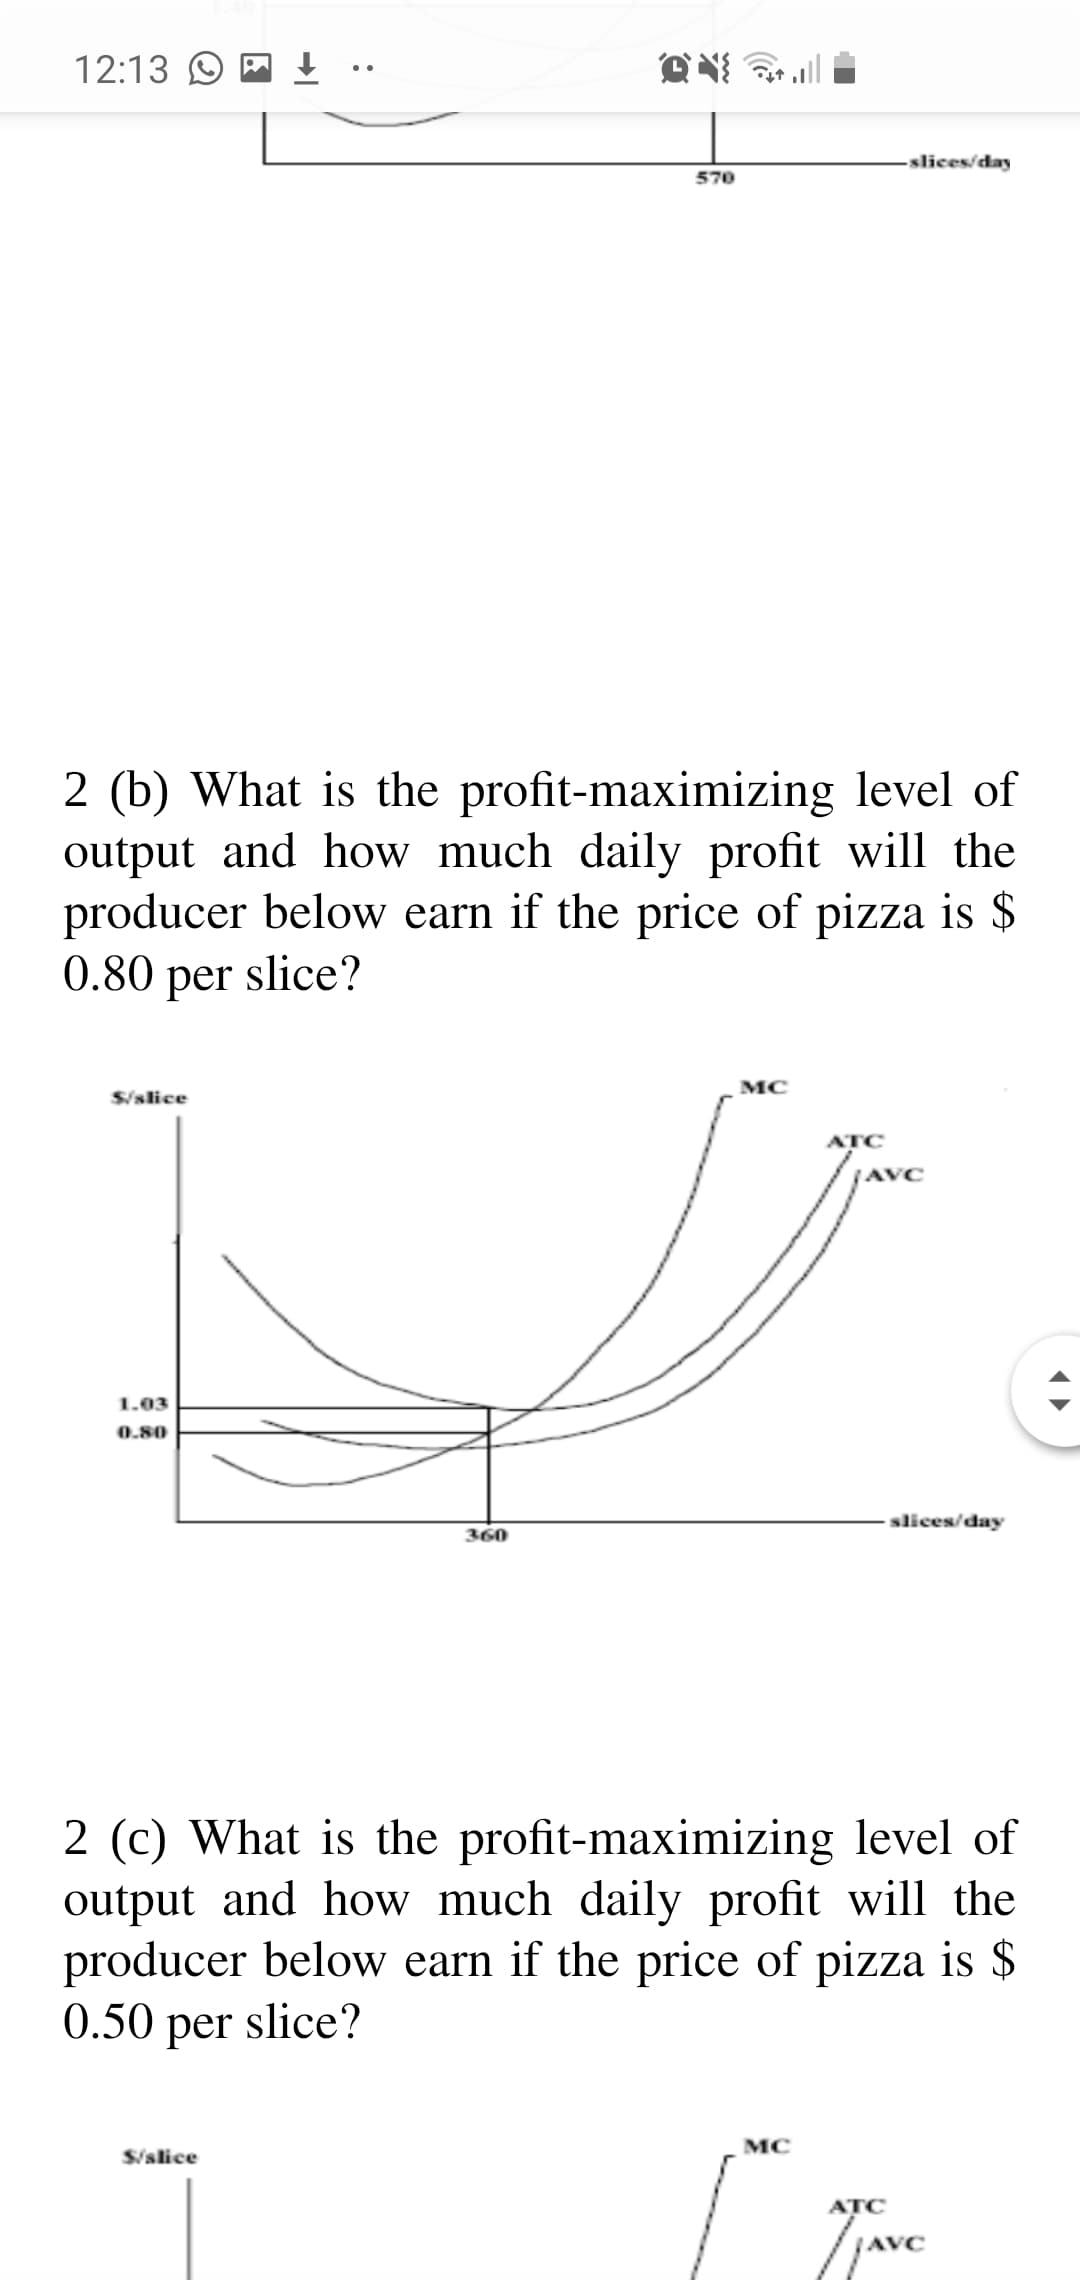 2 (b) What is the profit-maximizing level of
output and how much daily profit will the
producer below earn if the price of pizza is $
0.80 per slice?
MC
S/slice
ATC
JAVC
1.03
0.80
slices/day
360
